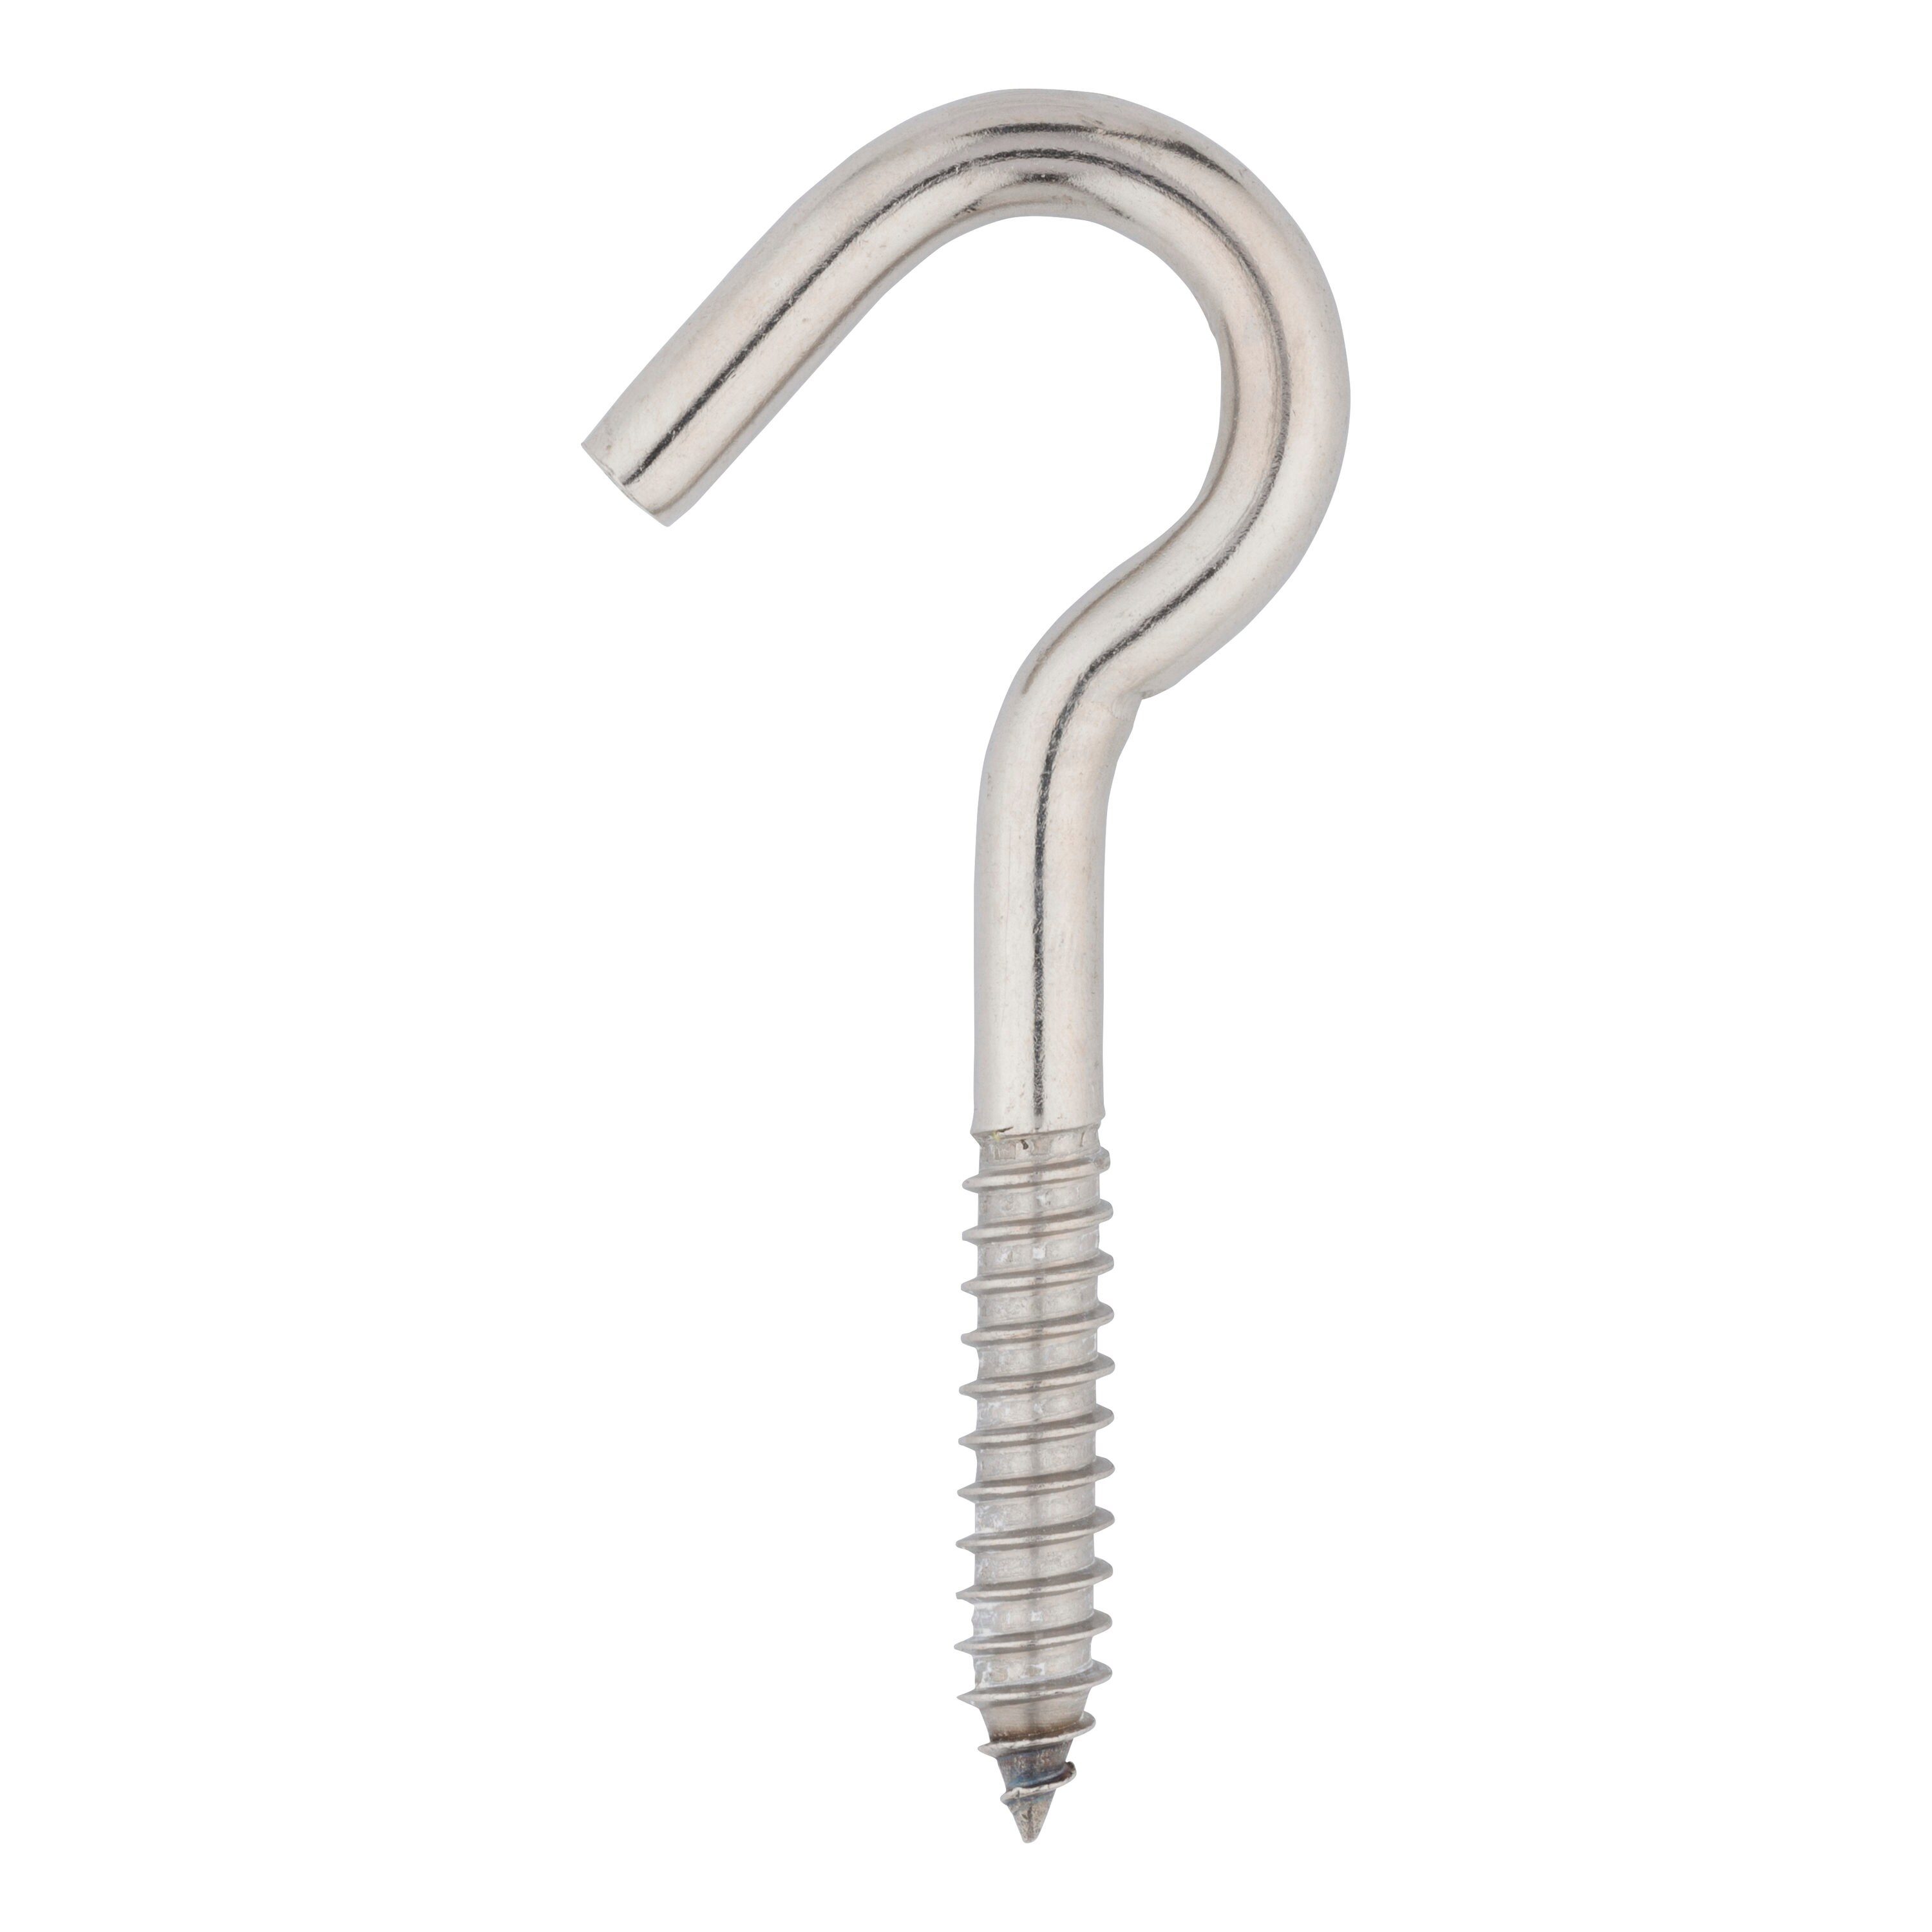 Interior and exterior applications Hooks at